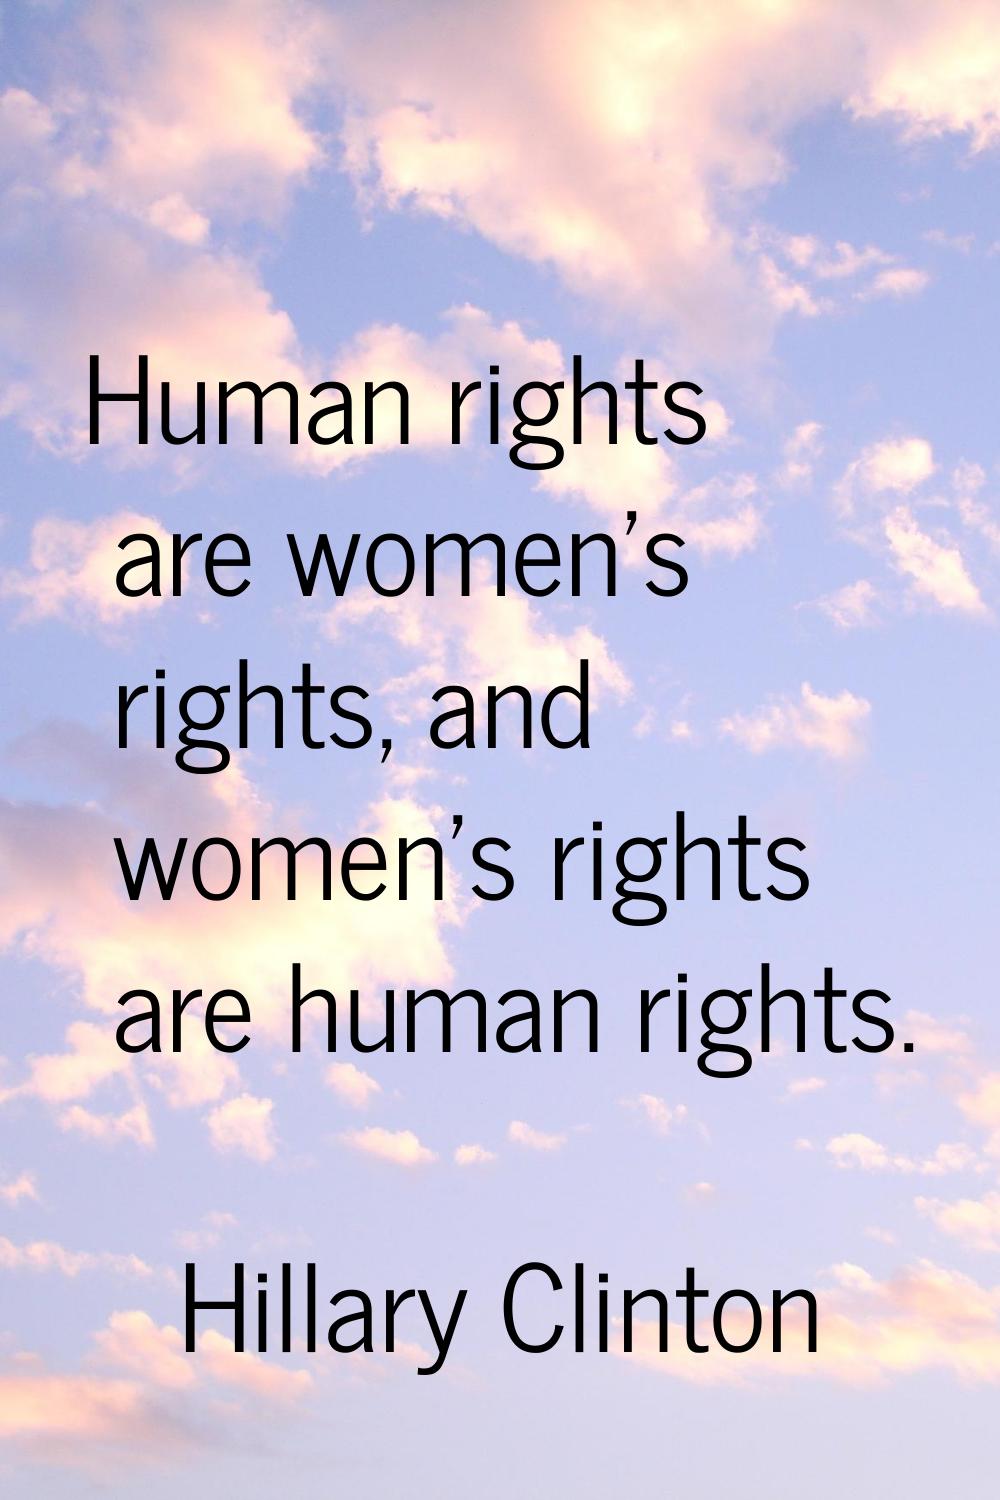 Human rights are women's rights, and women's rights are human rights.